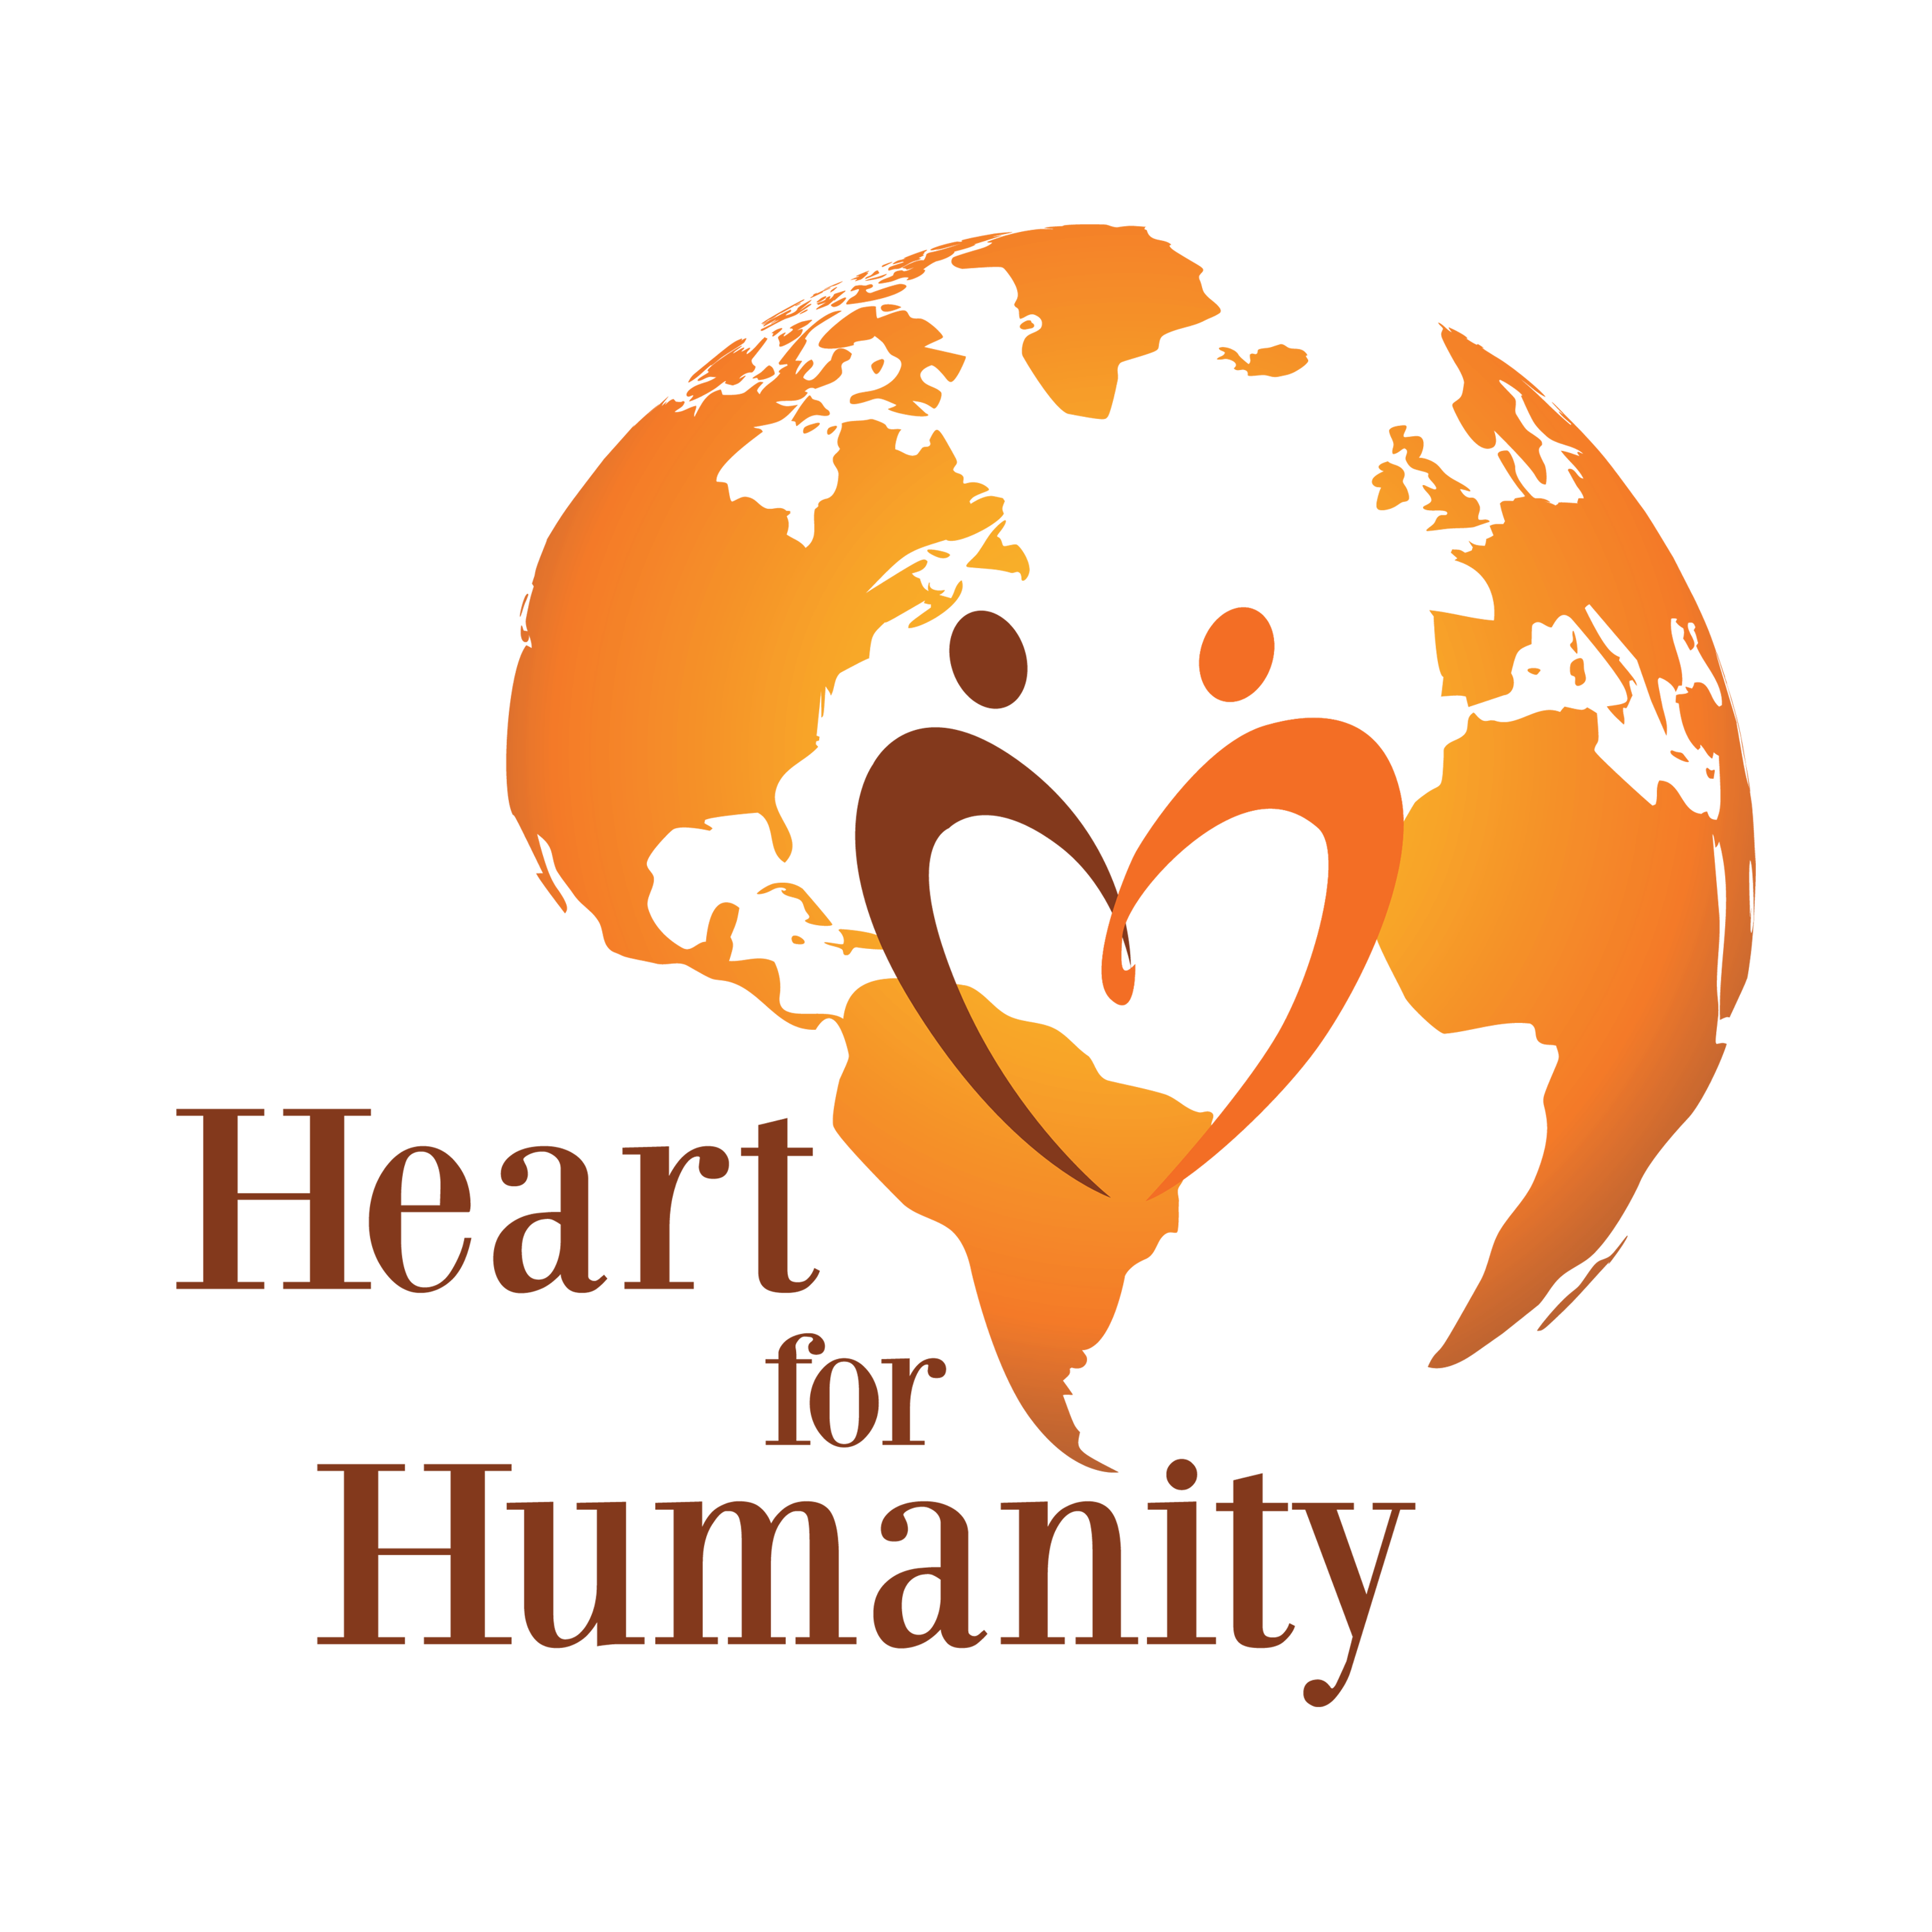 Heart for Humanity